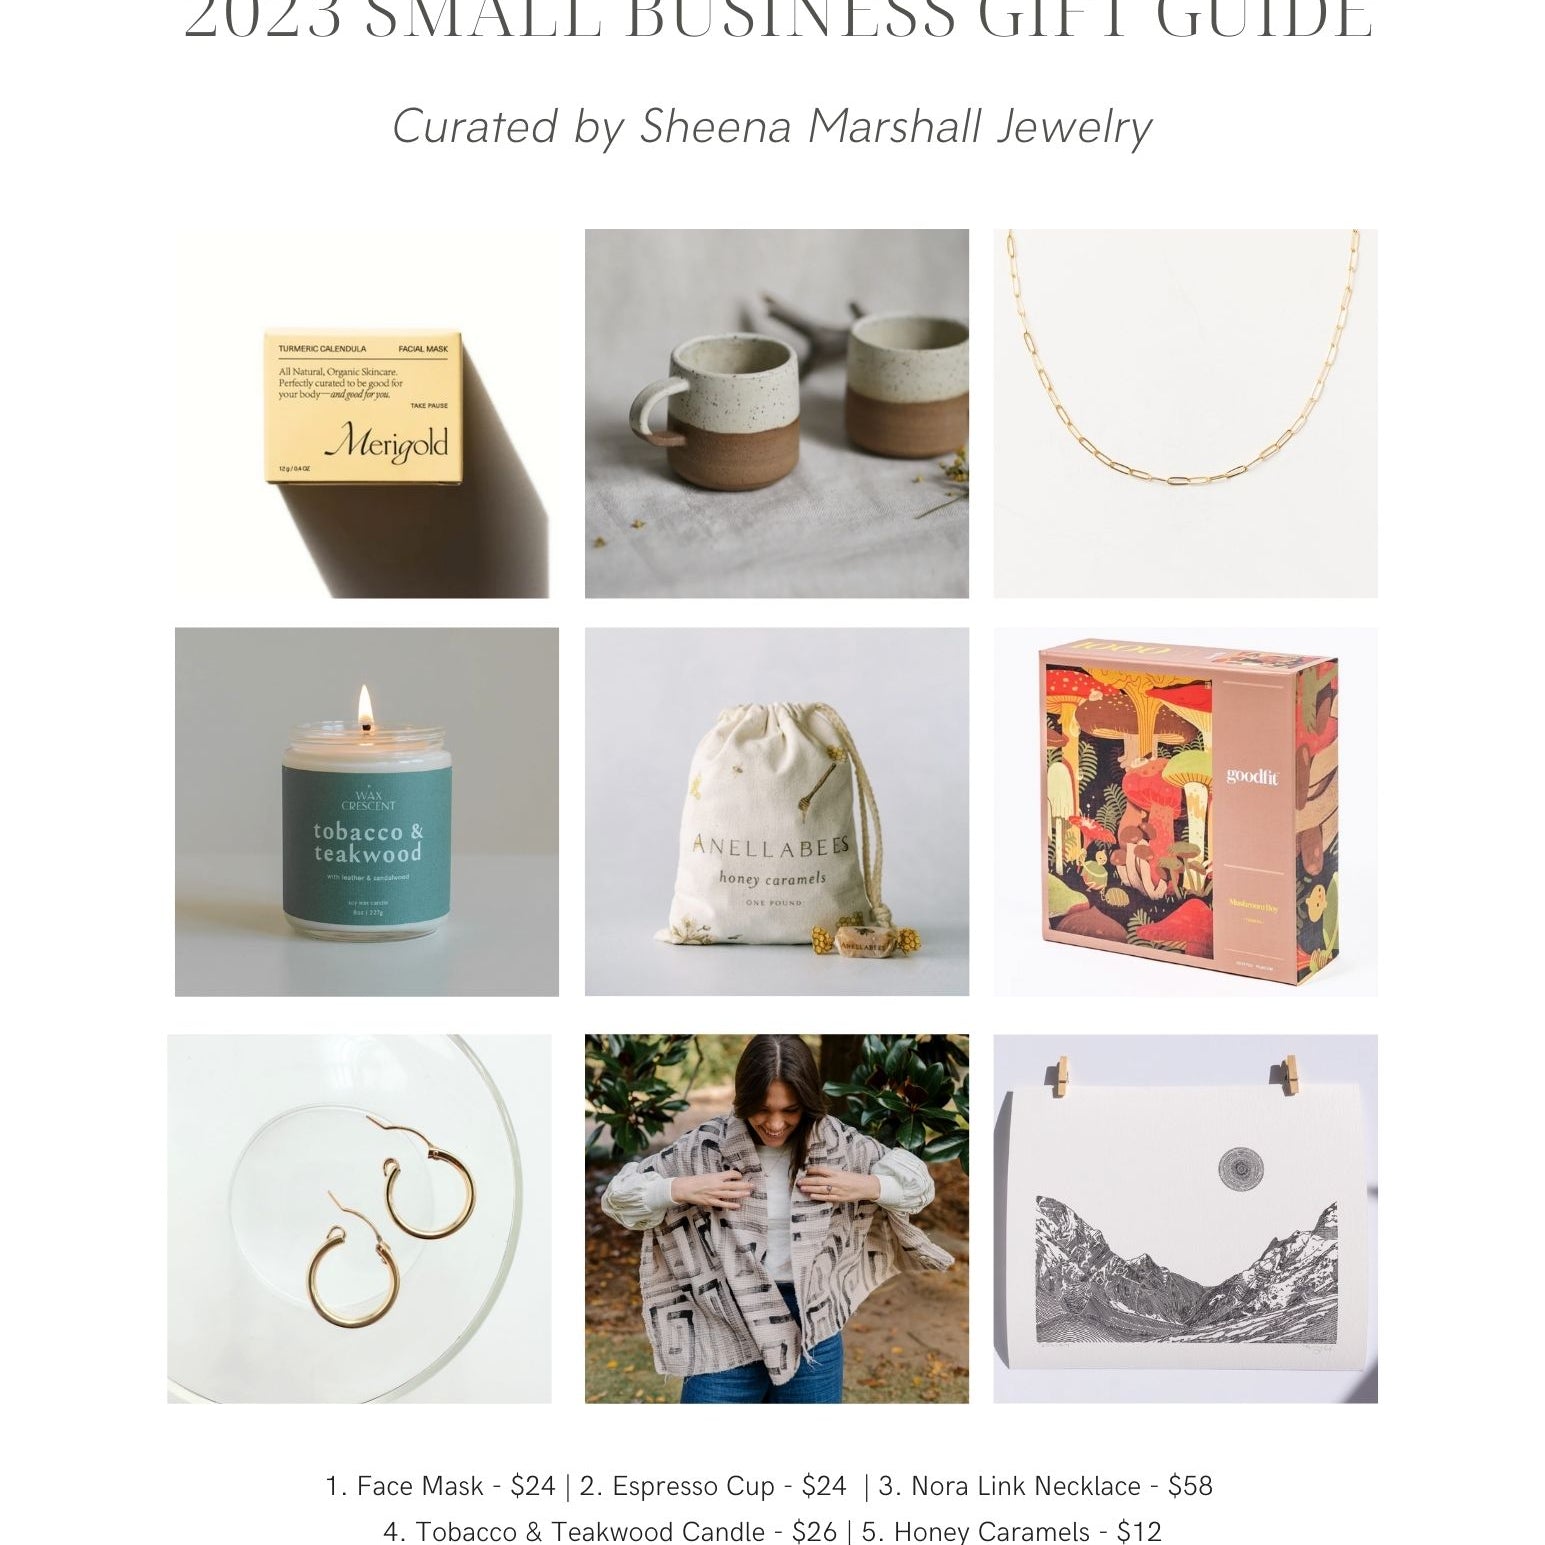 2023 Small Business Gift Guide